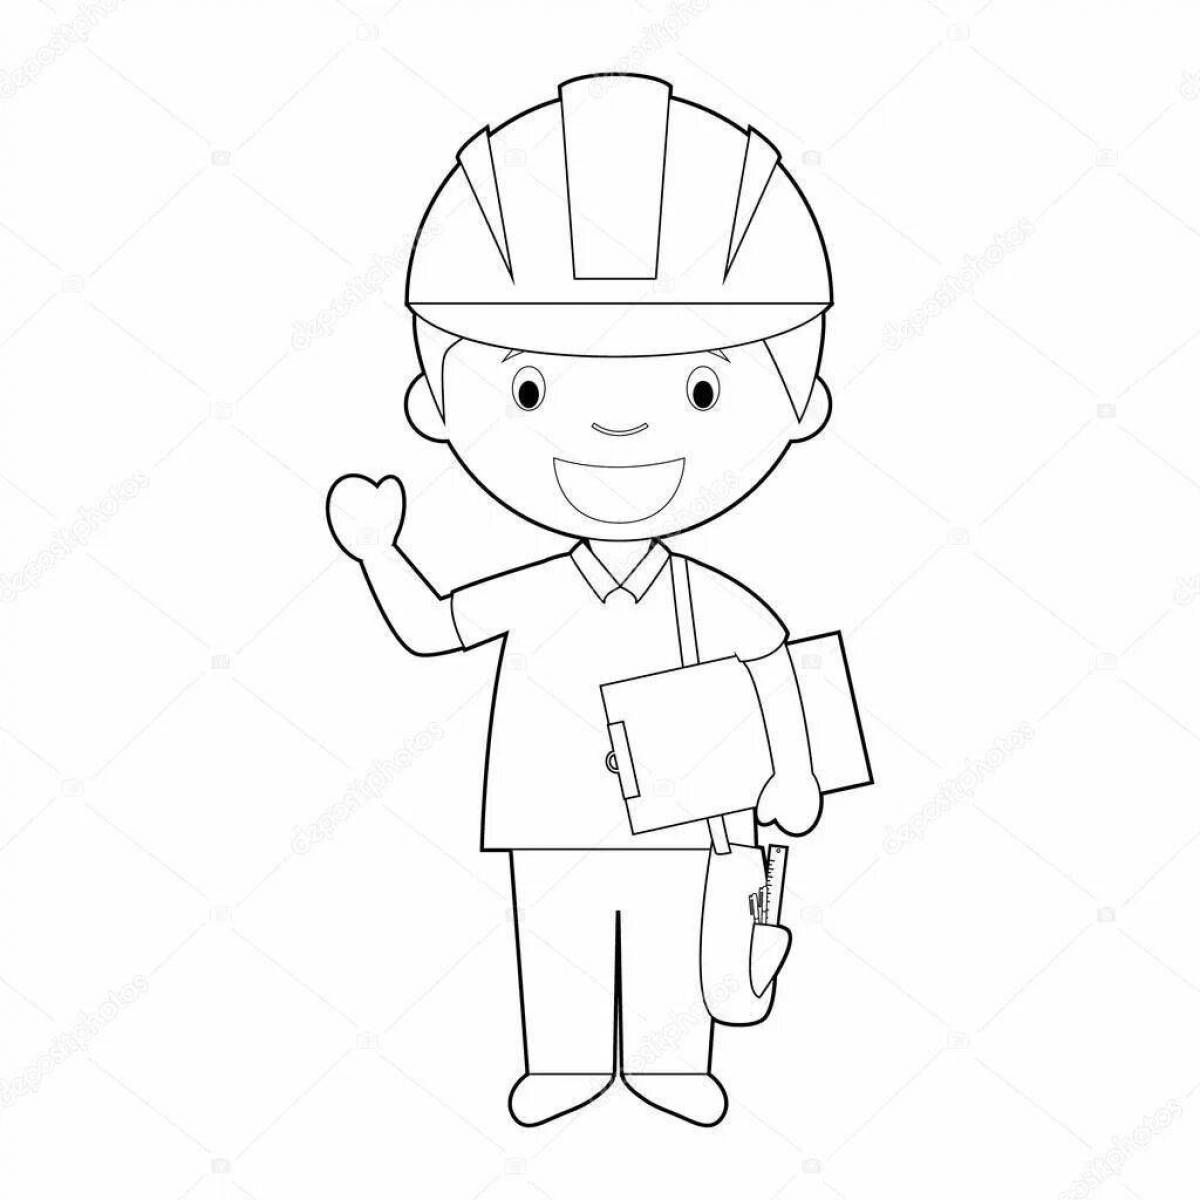 Imaginative engineer coloring page